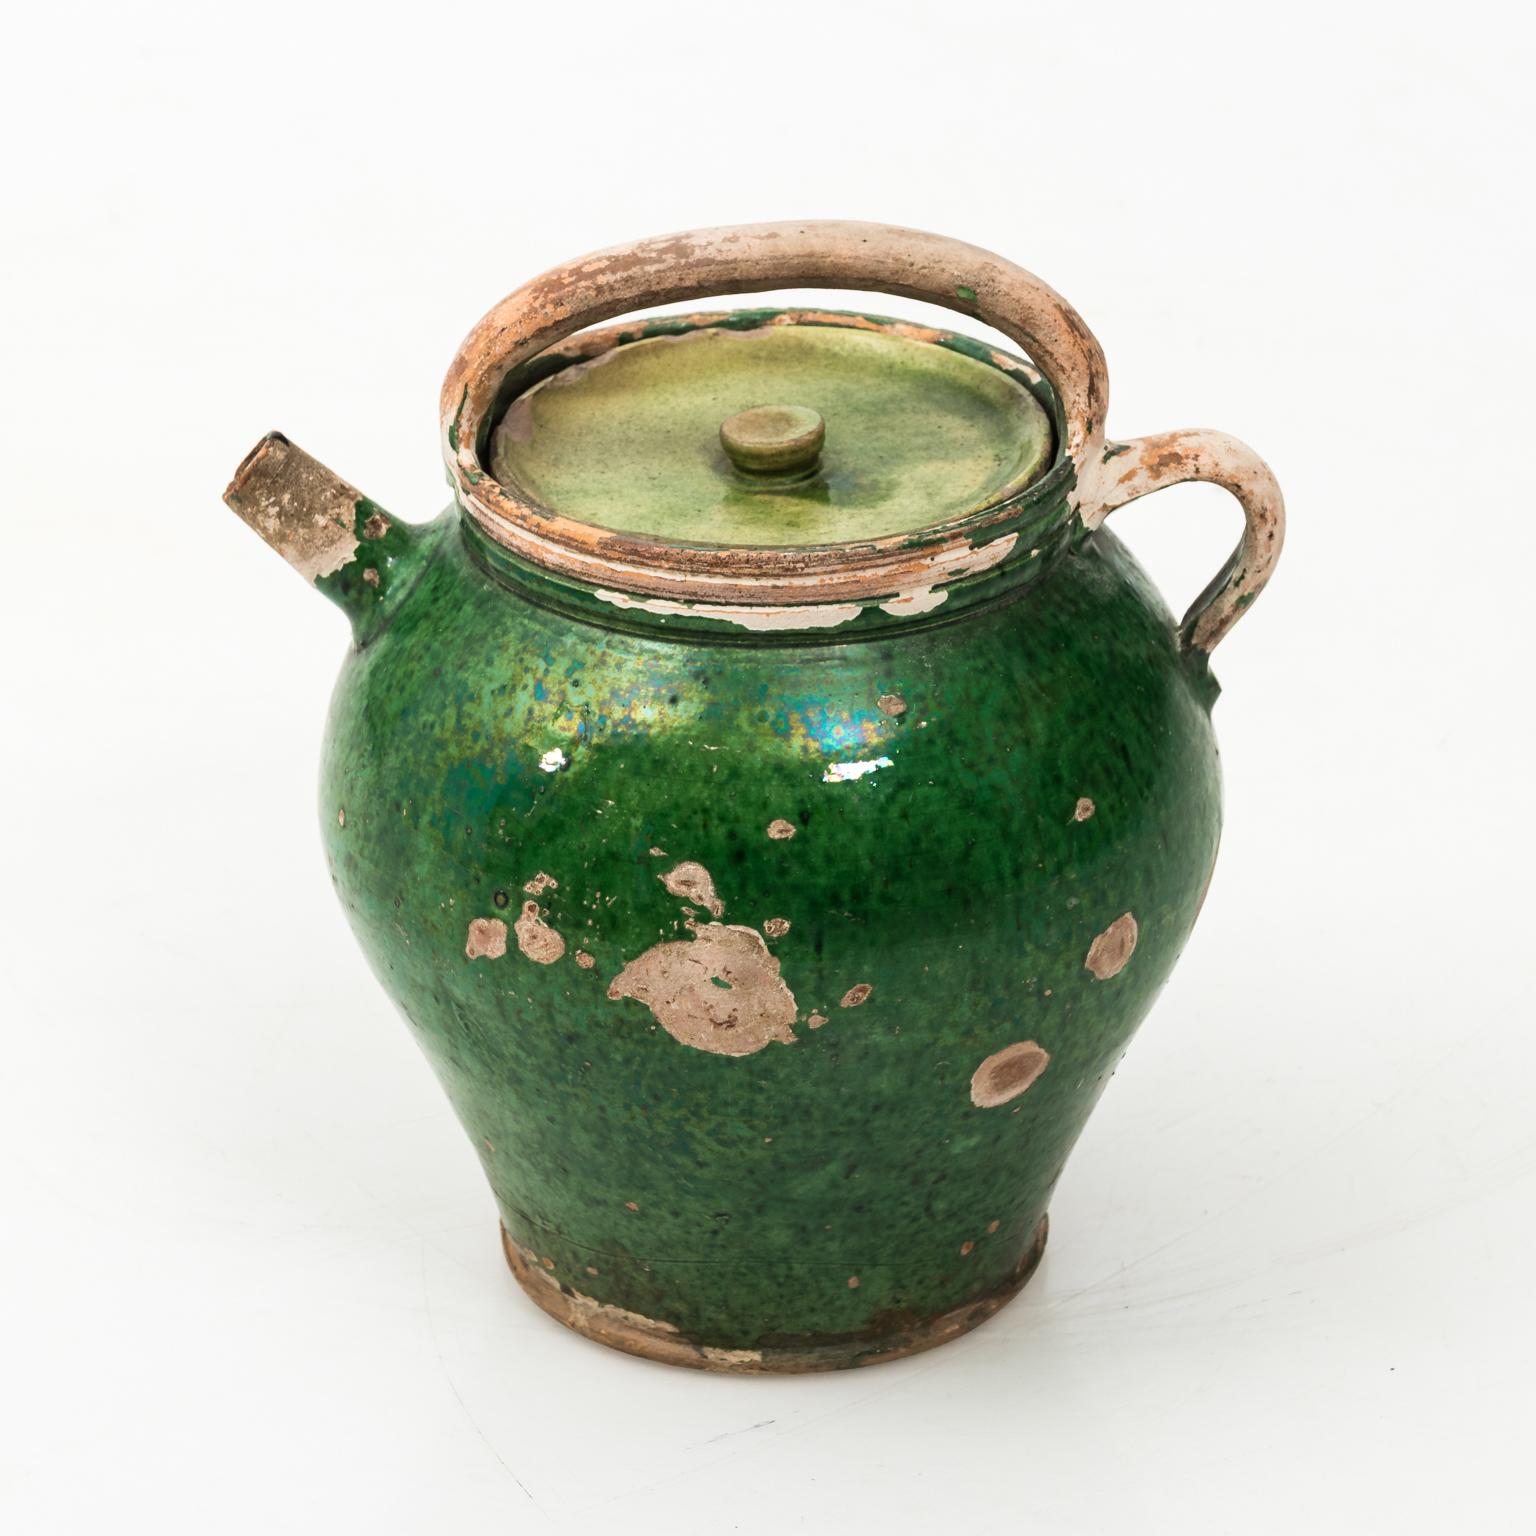 French confit jug with lid in a green glaze, circa 1880. Please note of wear consistent with age including worn surface loss to the paint along with chips to the spout. The lid itself also has color loss due to age.